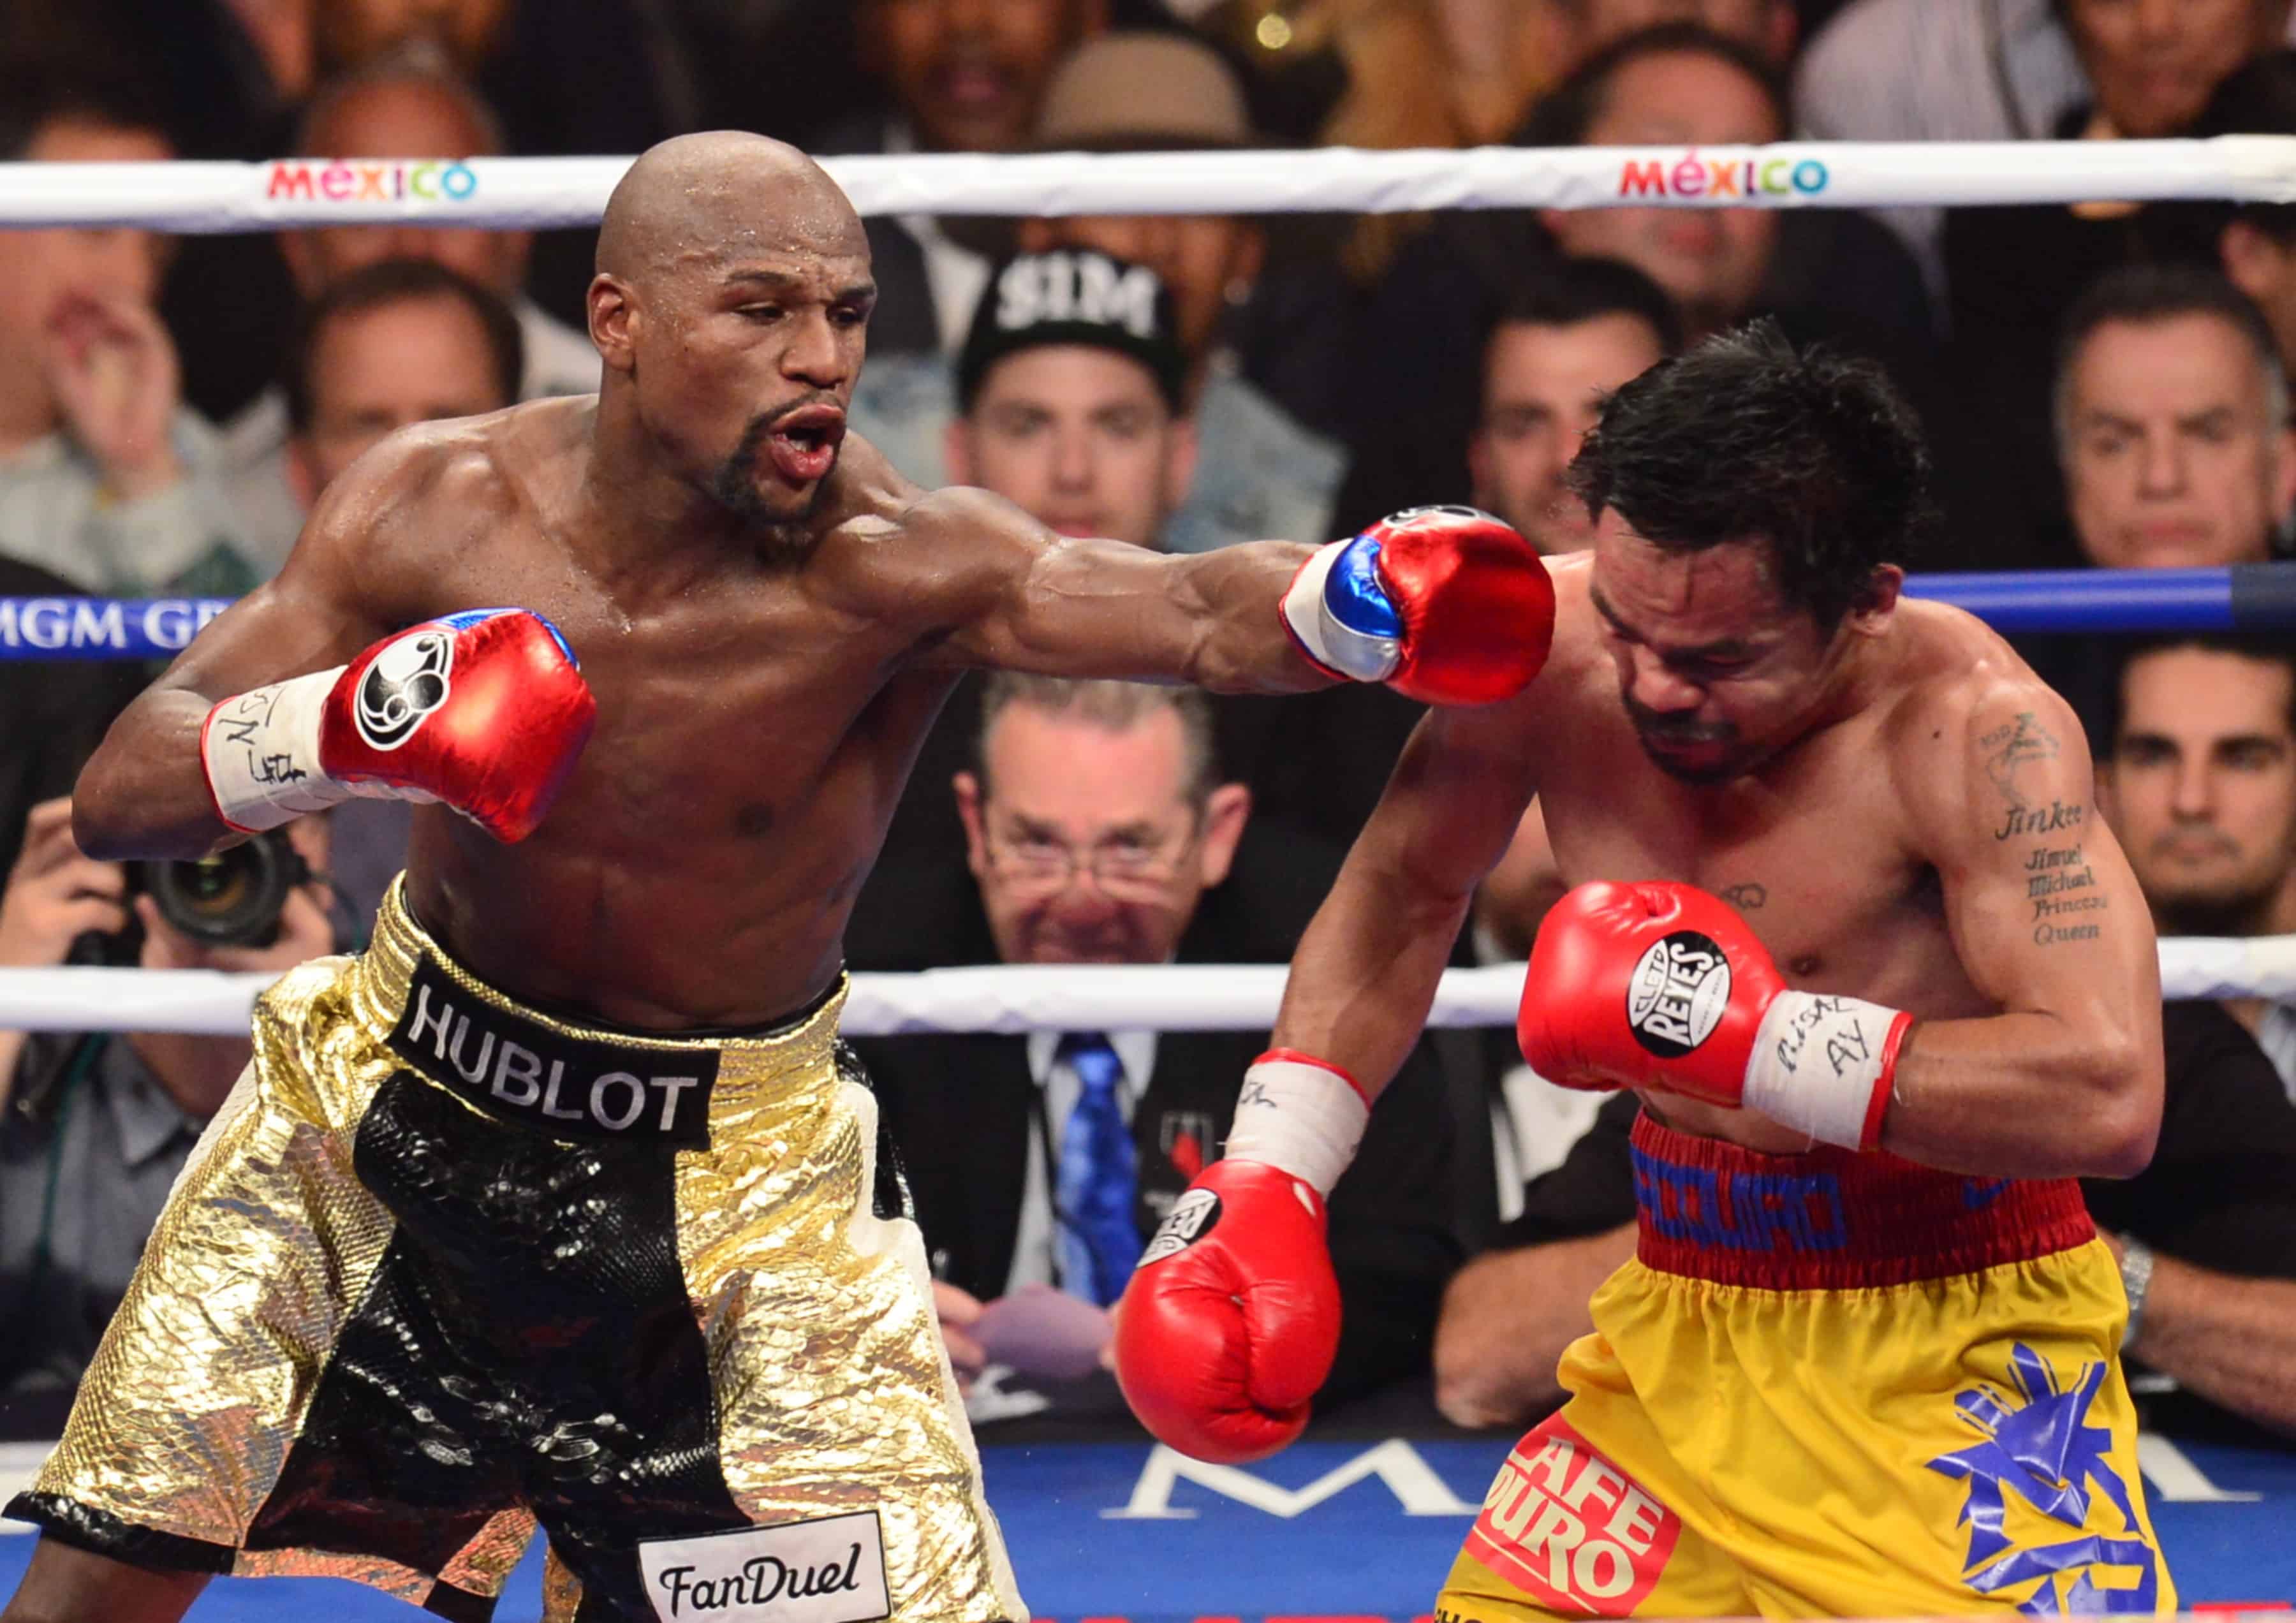 Floyd Mayweather Jr., left, connects against Manny Pacquiao.